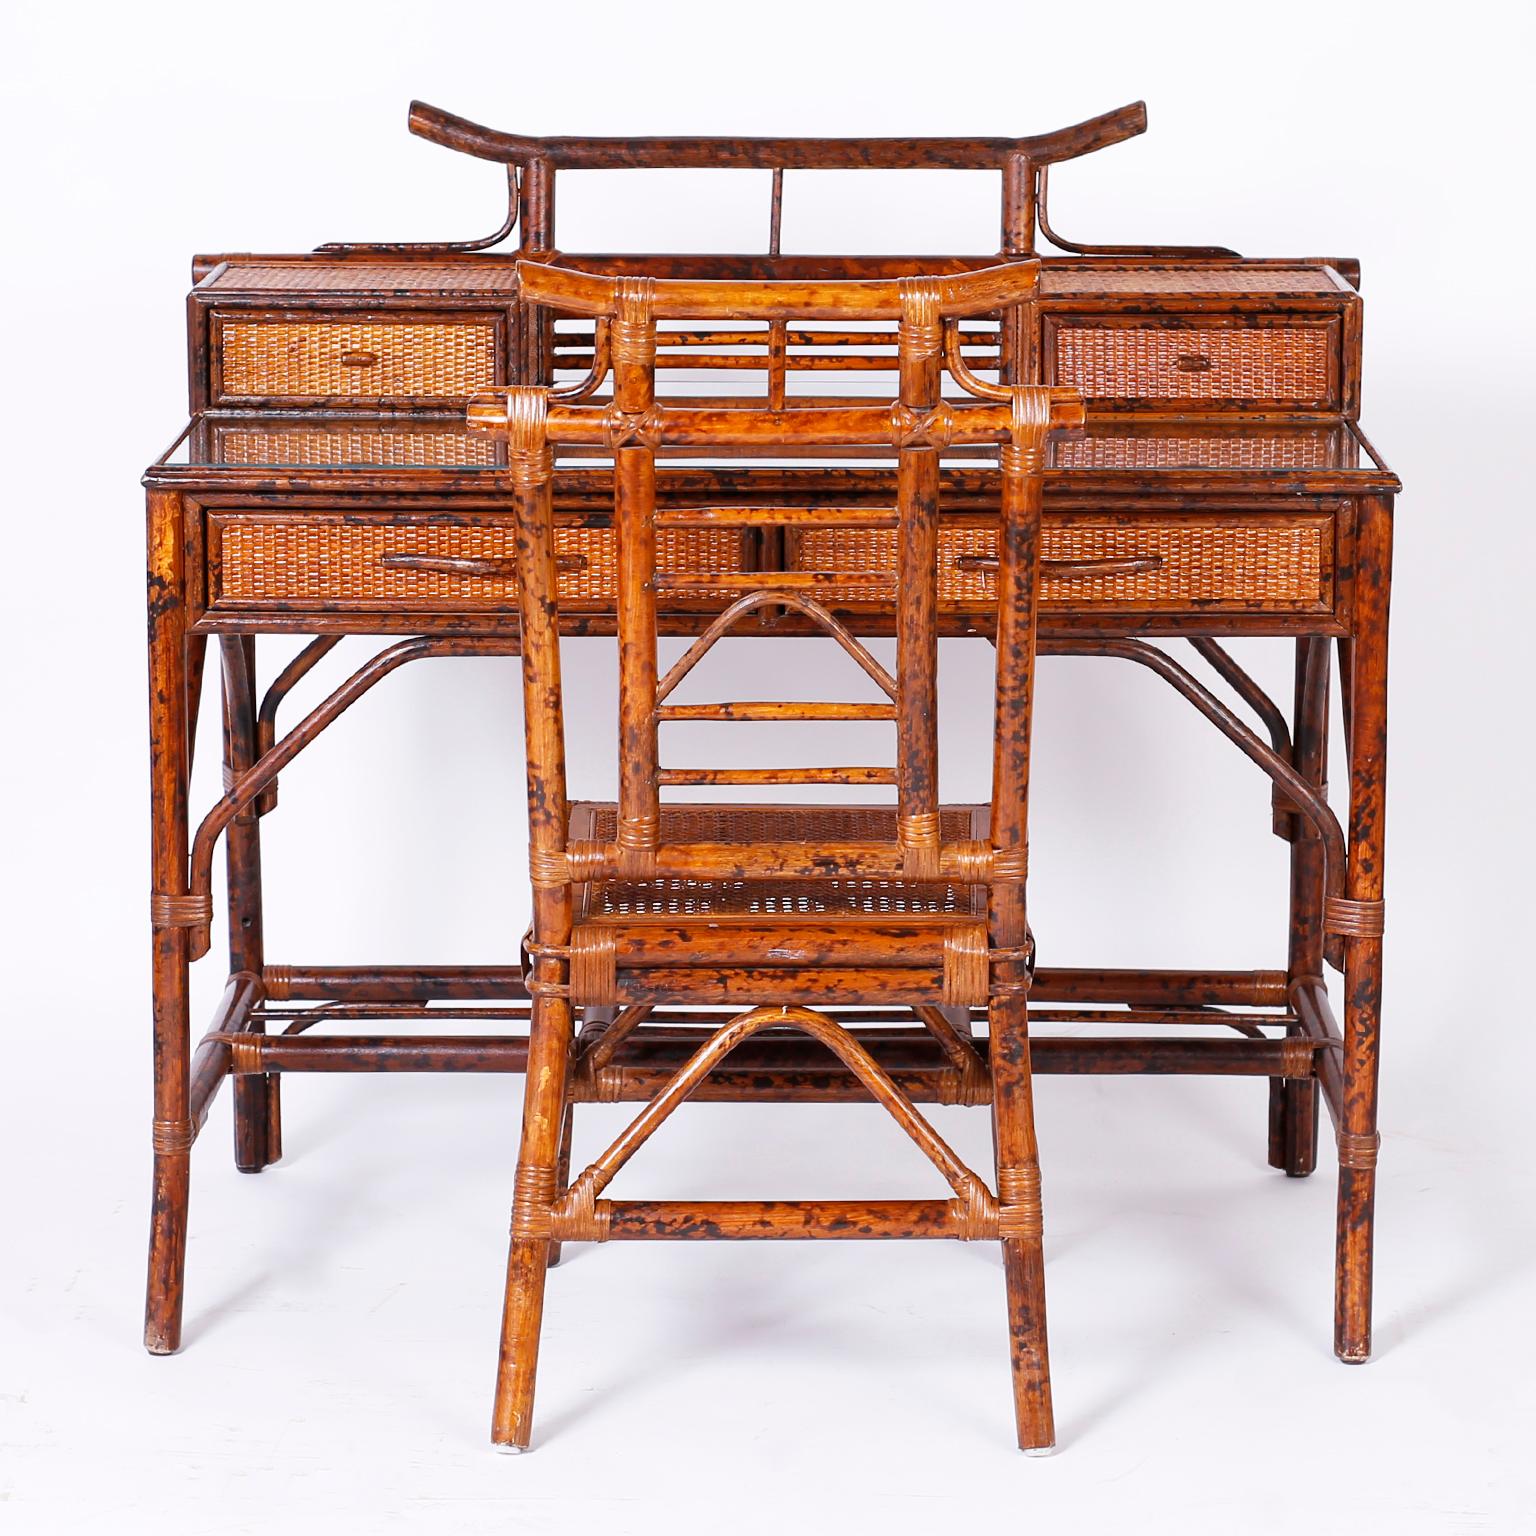 British colonial desk and caned chair with faux bamboo frame highlighted by a pagoda motif, two glove boxes, glass covered writing surface, two drawers, grasscloth panels, and splayed feet. Perfect fit for those looking for the hottest in the wicker